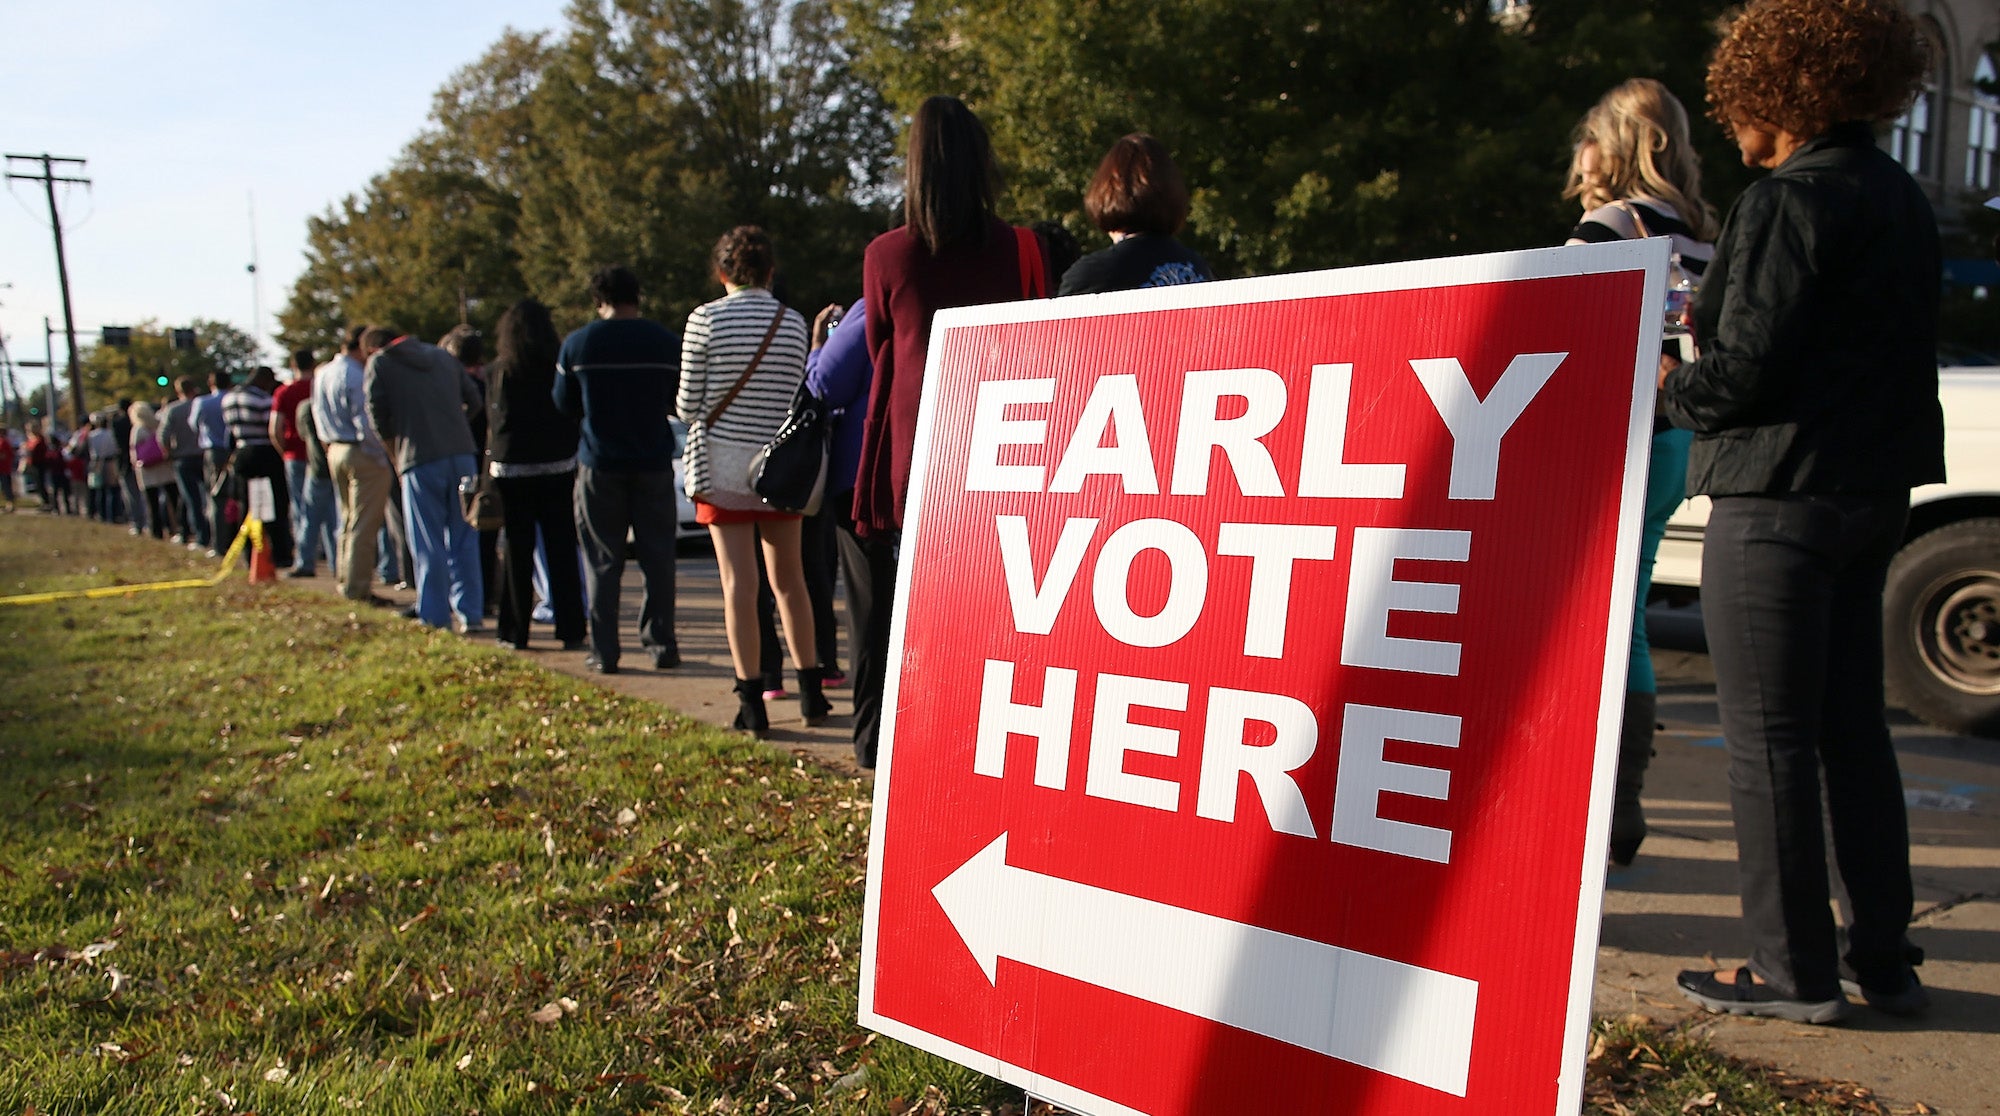 Early voters line up outside of the Pulaski County Regional Building on November 3, 2014 in Little Rock, Arkansas.